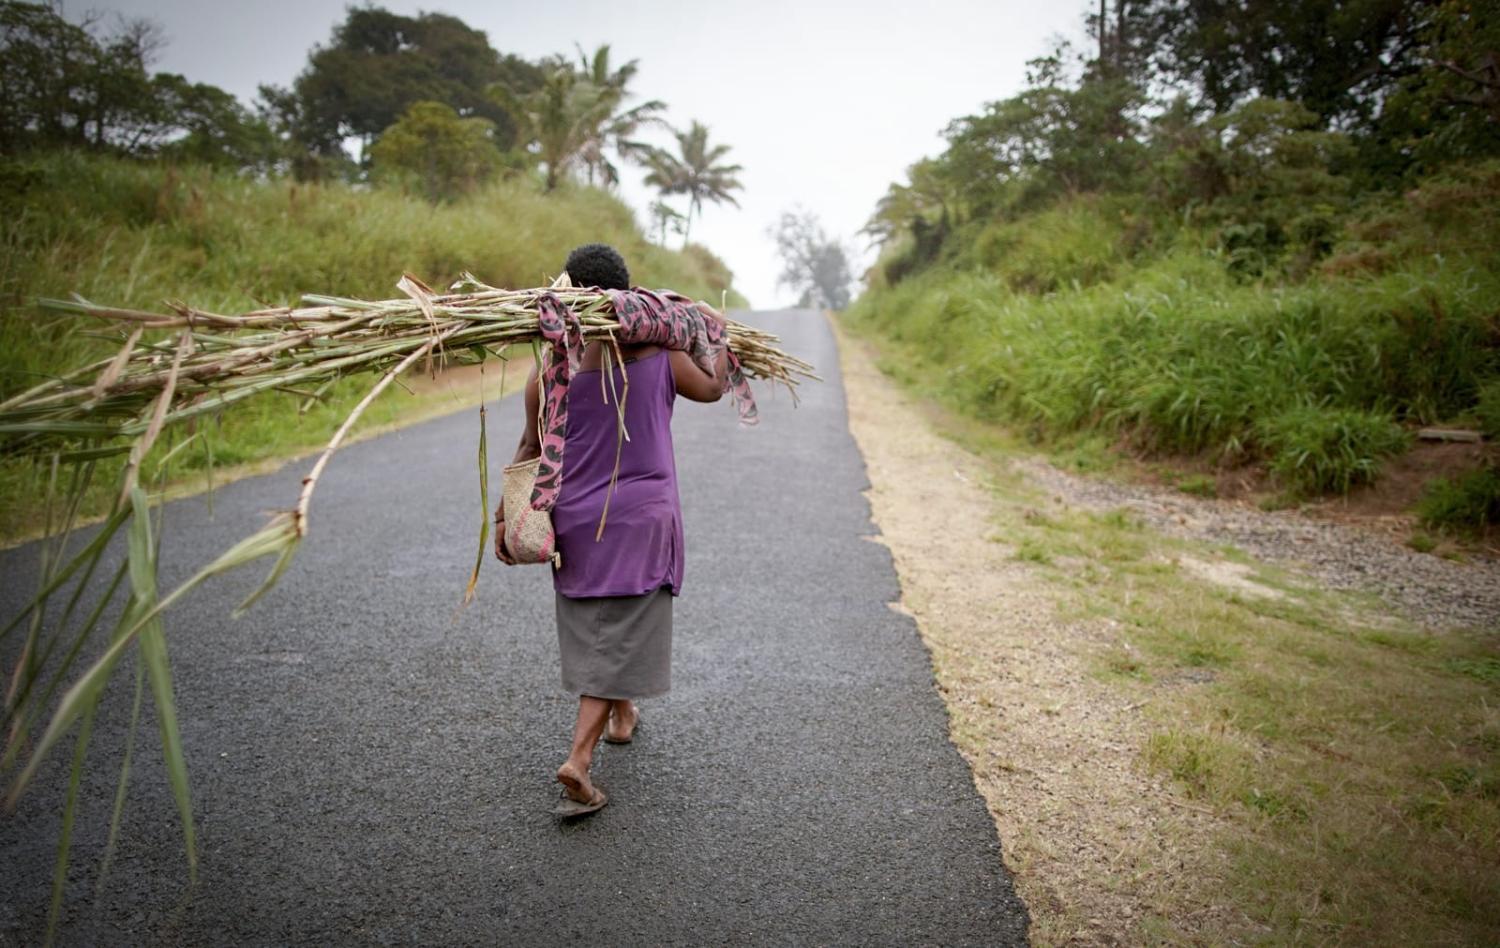 Vanuatu needs better roads - but within fiscal constraints (Mario Tama/Getty Images)